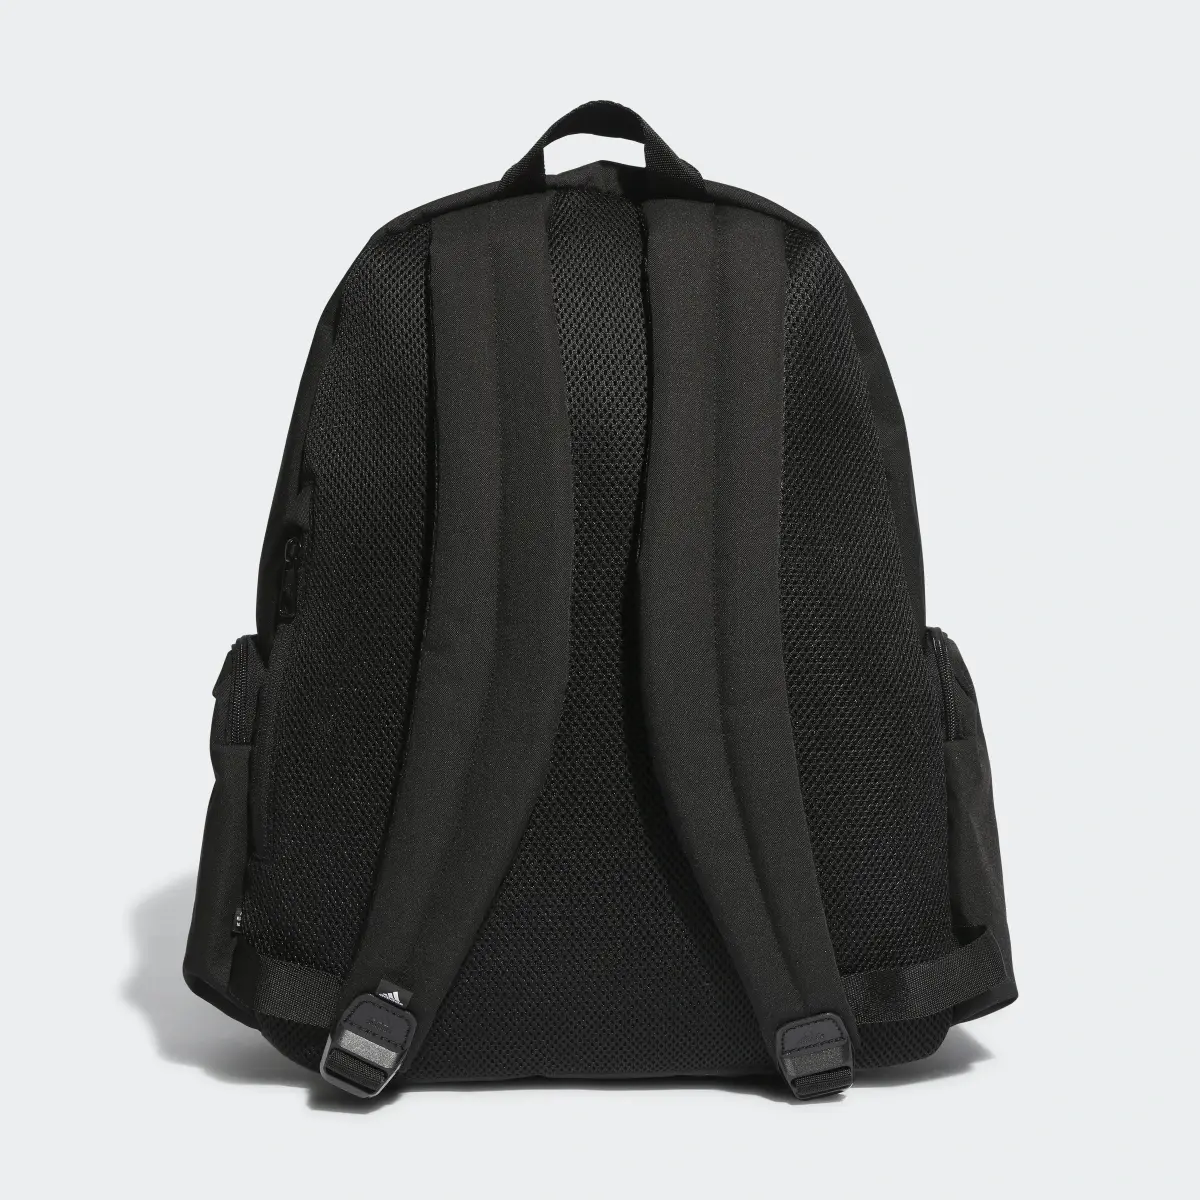 Adidas Back to School Classic Backpack. 3